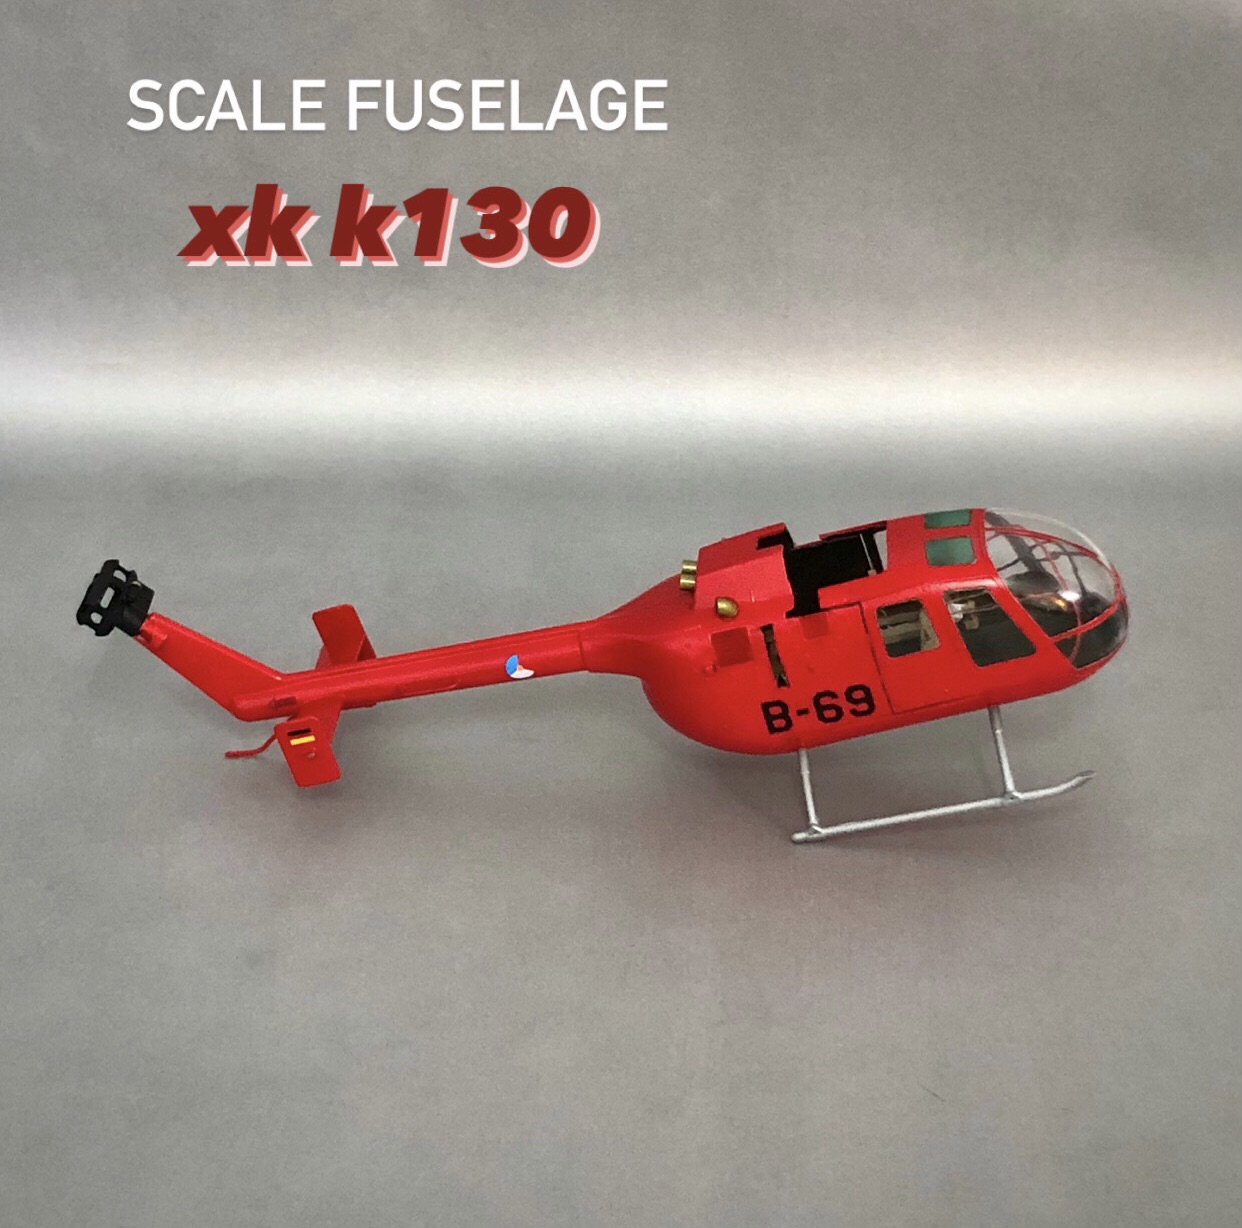 RC helicopter scale fuselage for XK K130 (BO-105) บอดี้ฮอสเกล